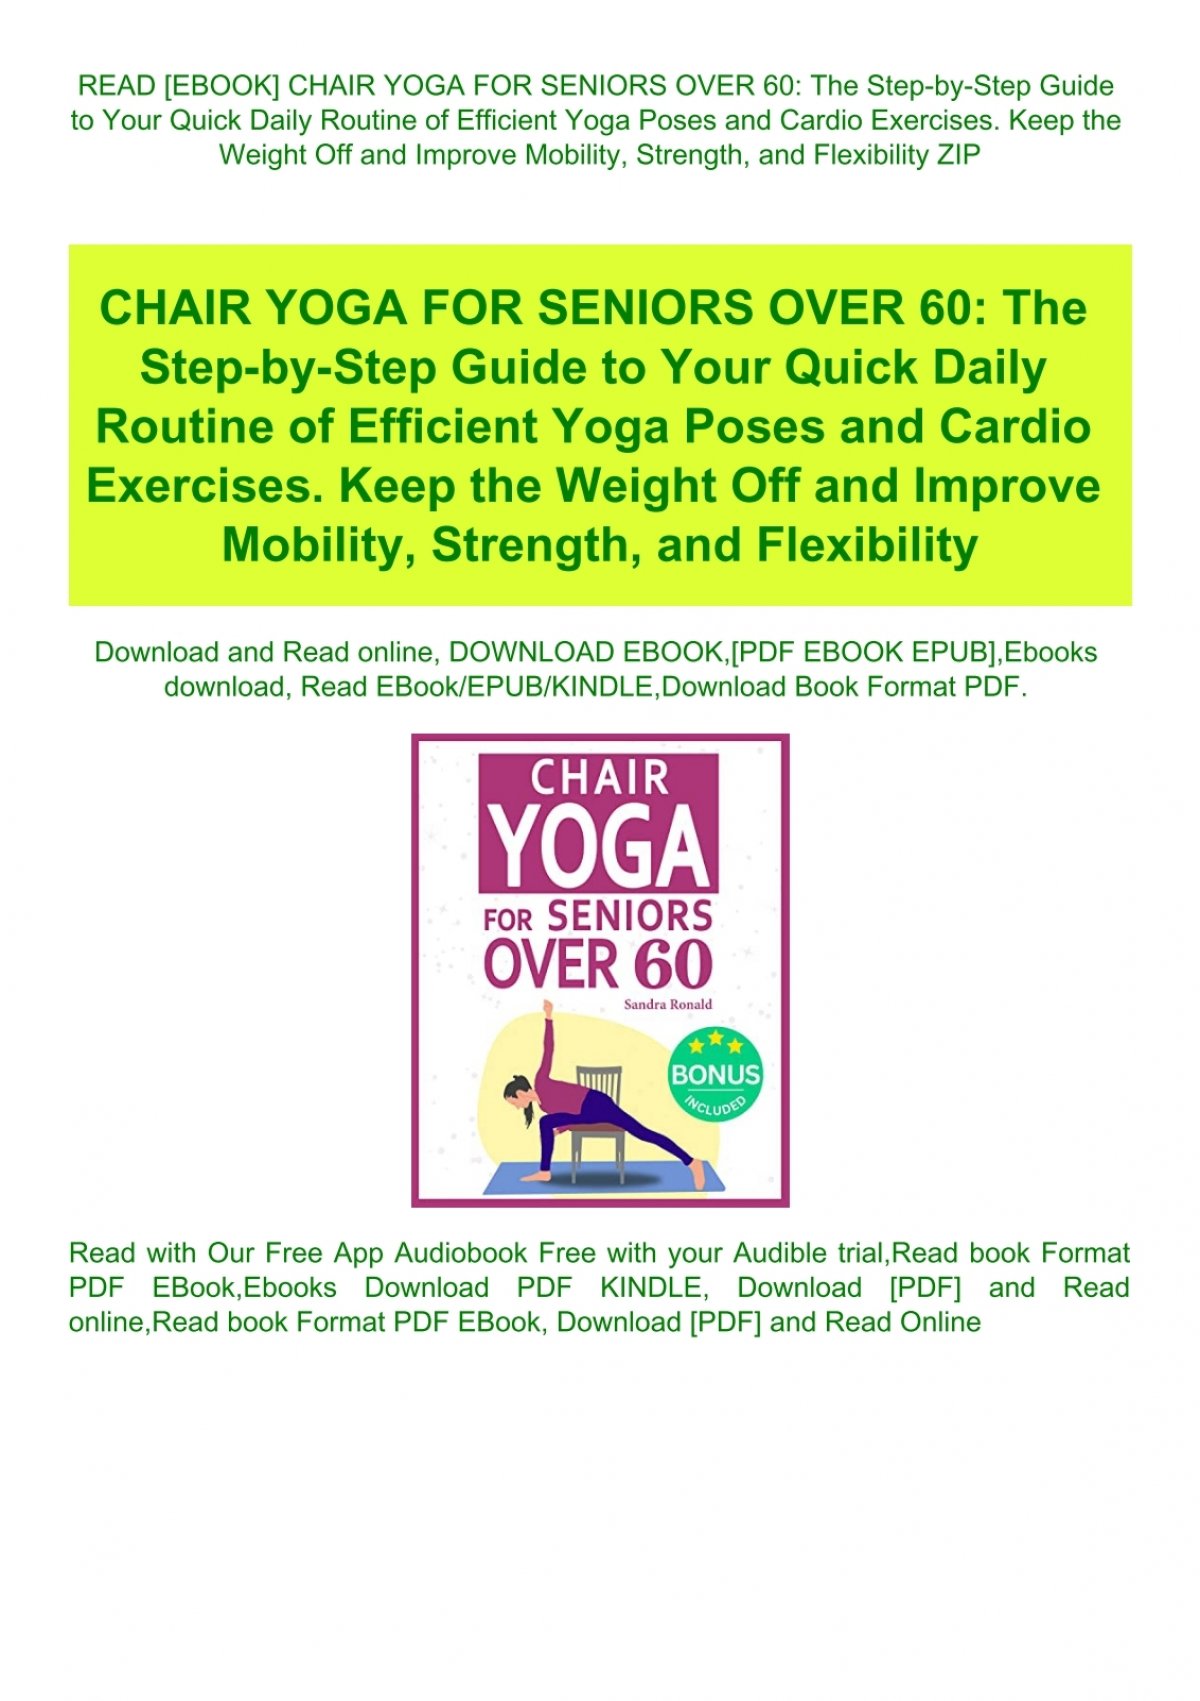 Chair Yoga For Seniors Over 60: The Step-by-Step Guide to Your Quick Daily  Routine of Efficient Yoga Poses and Cardio Exercises. Keep the Weight Off  and Improve Mobility, Strength and Flexibility: Marrow